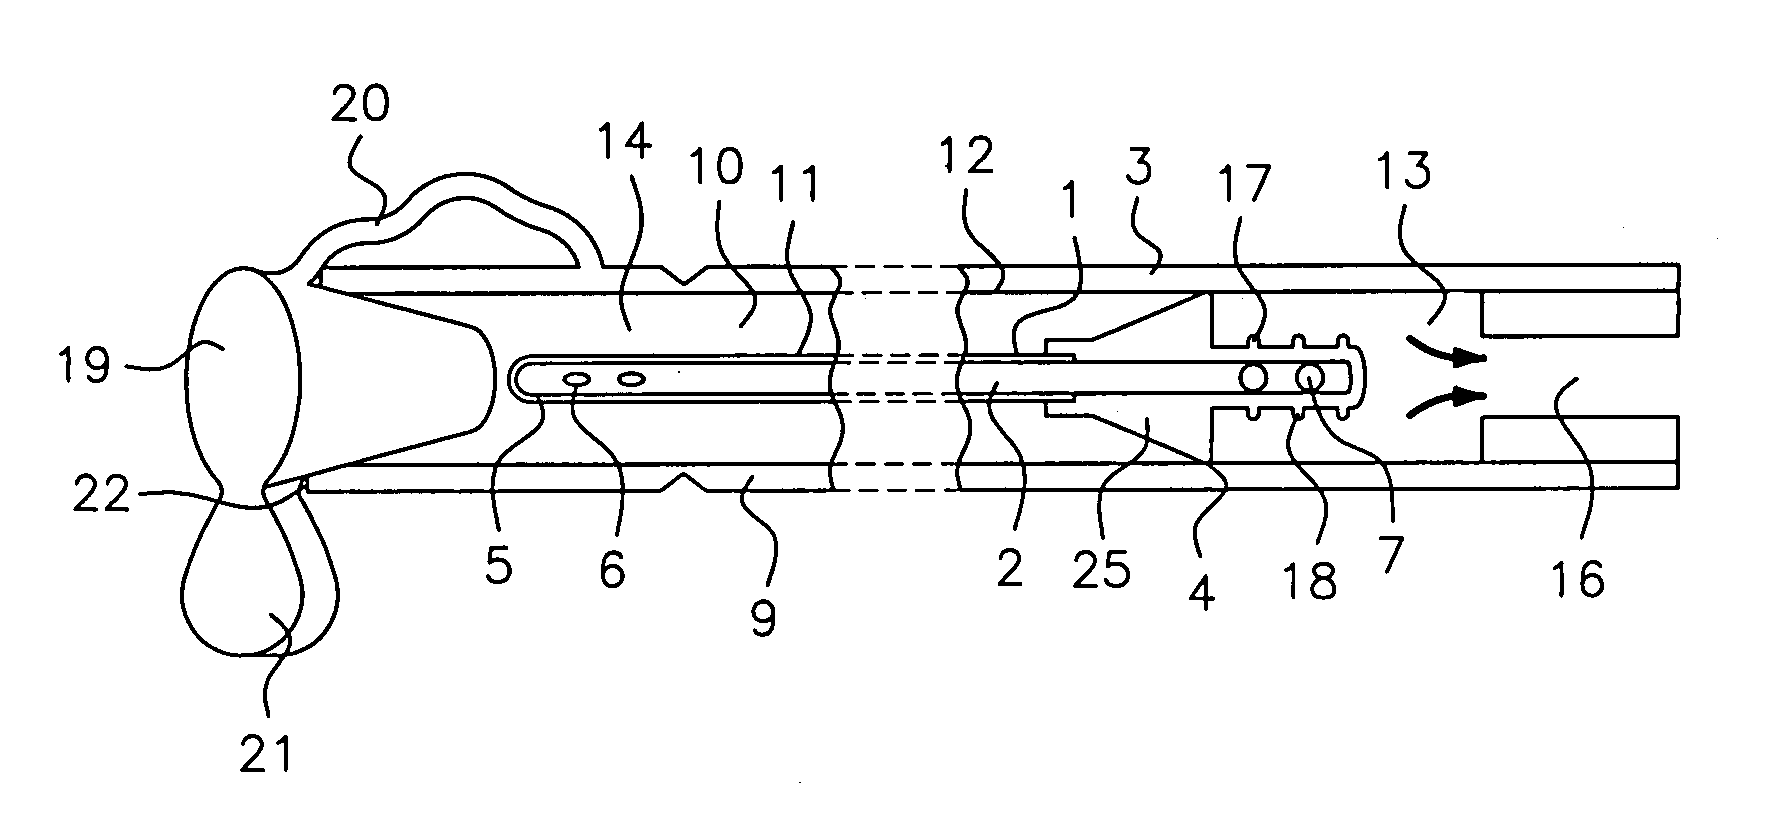 Urinary catheter assembly allowing for non-contaminated insertion of the catheter into a urinary canal